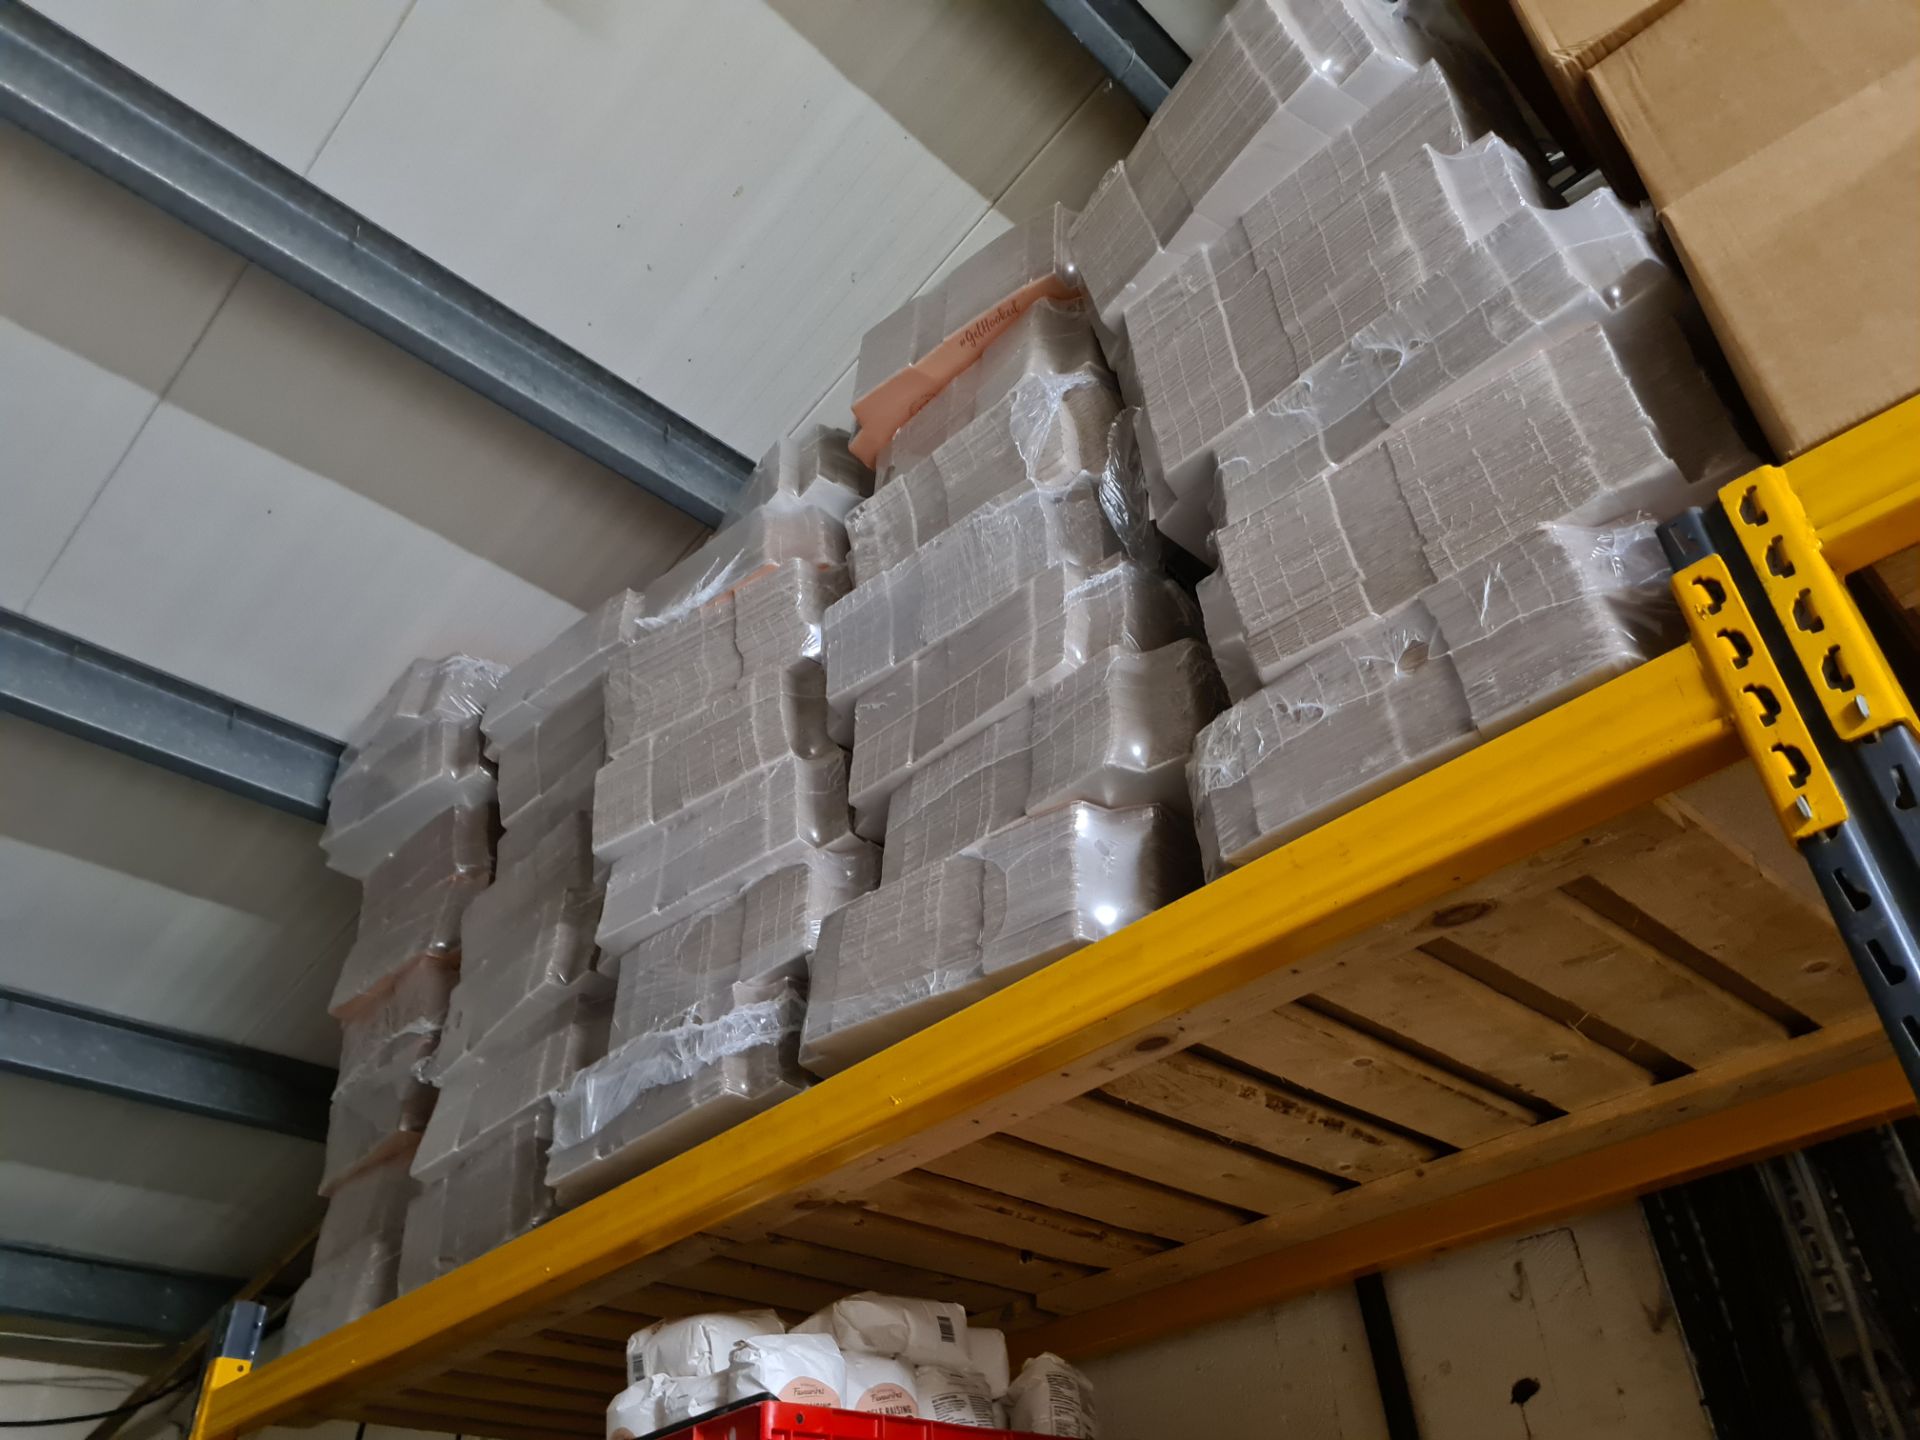 Large Quantity of Branded and Unbranded Packaging, as set out on 2 bays of racking - Image 6 of 6